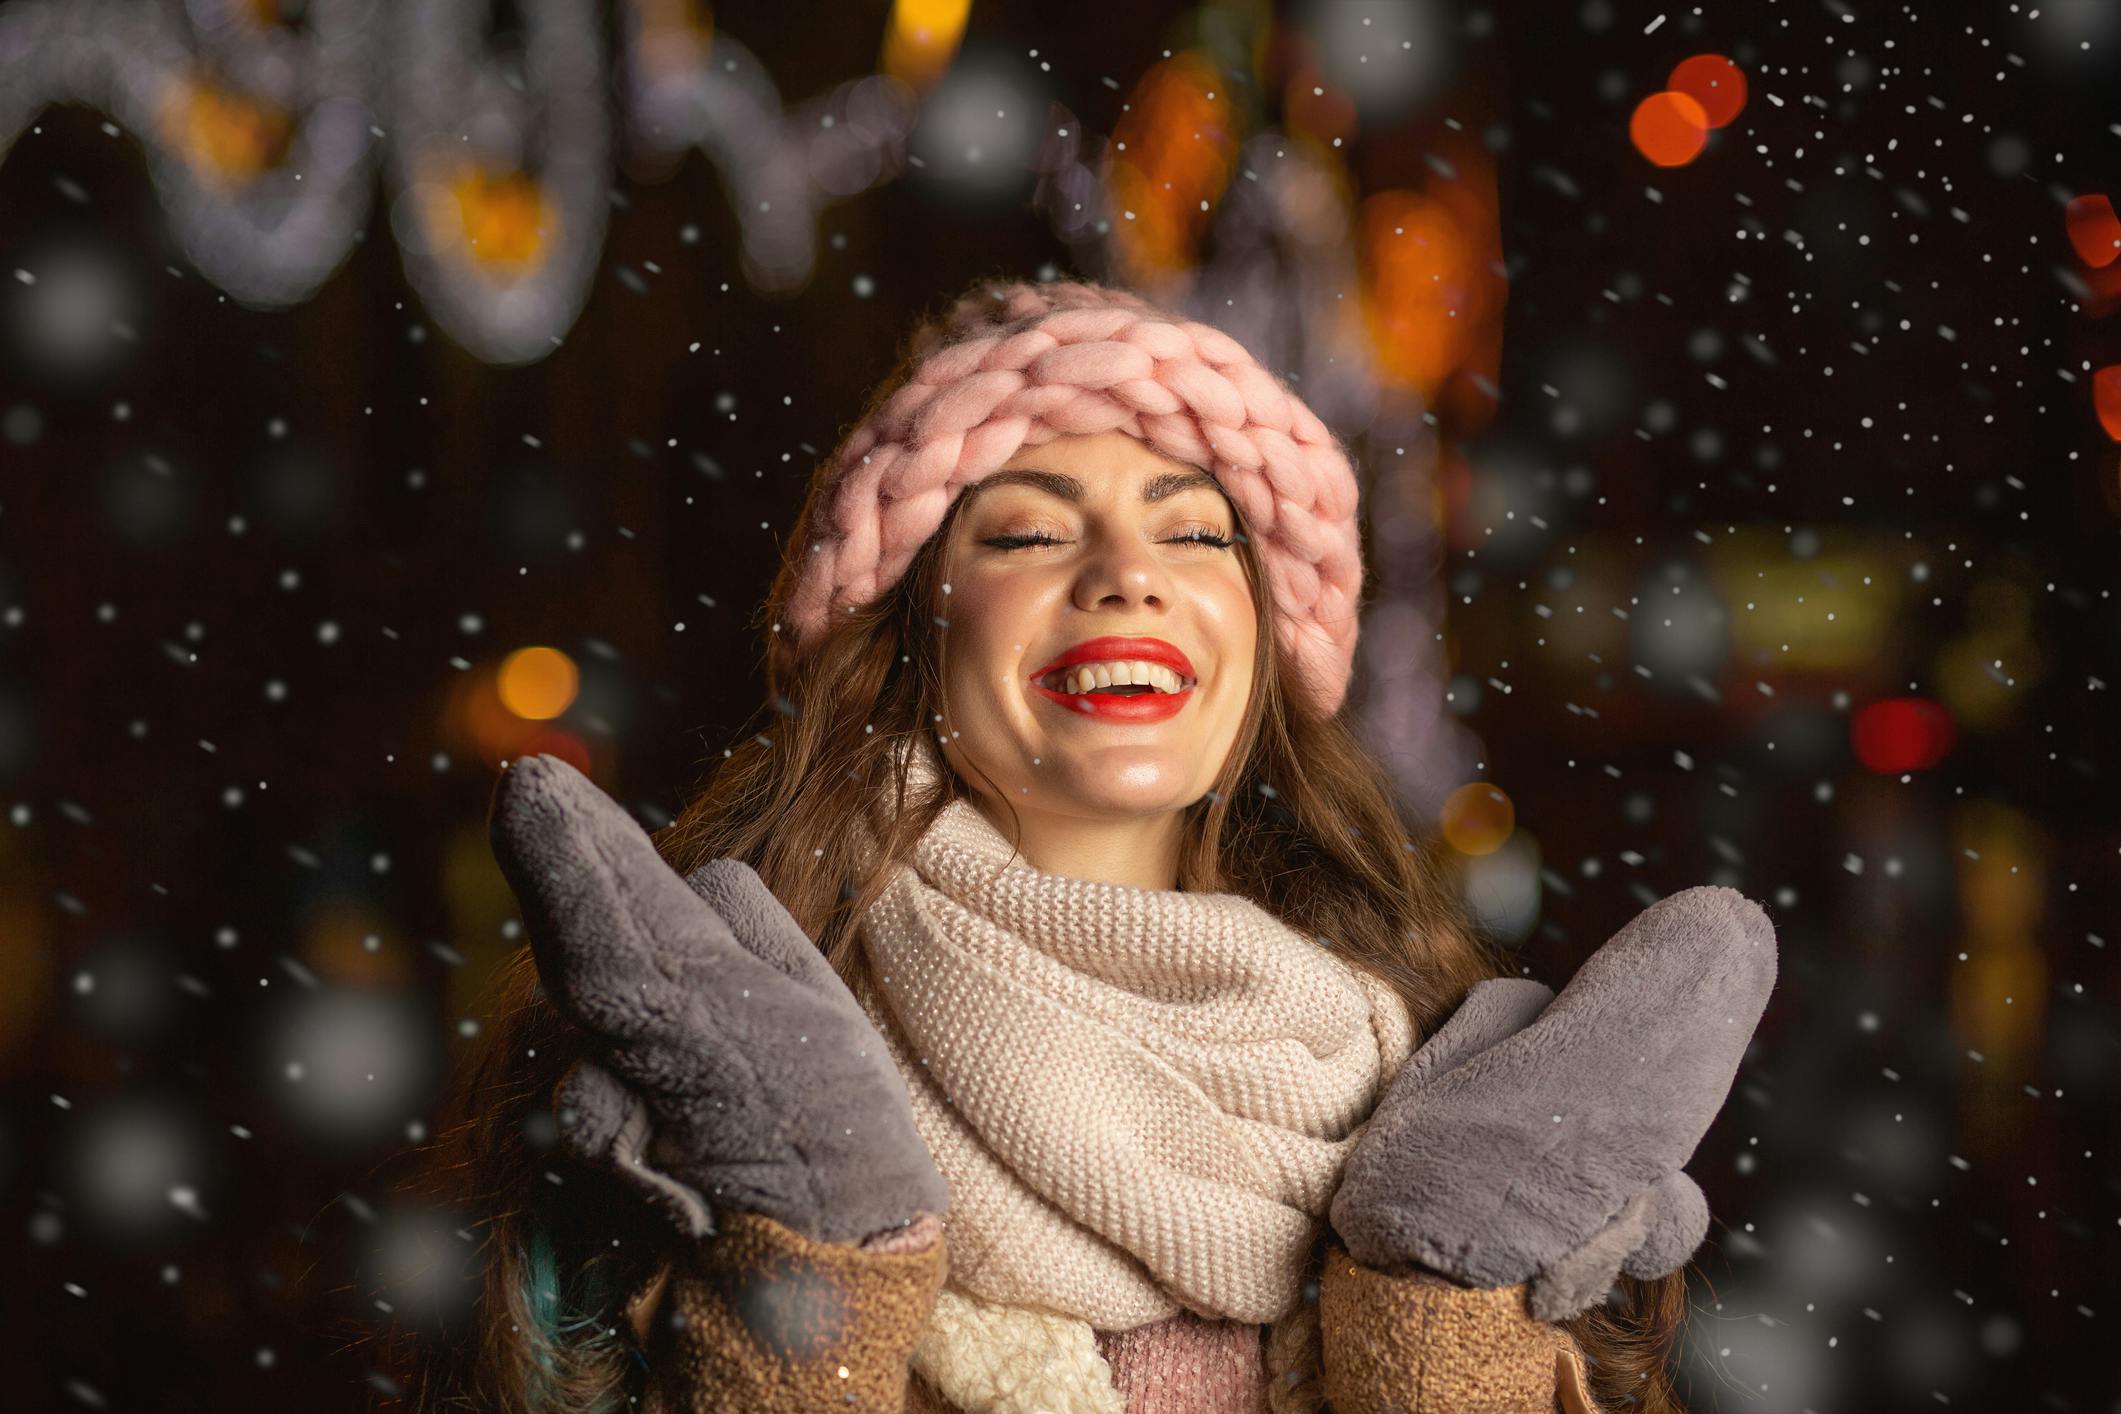 woman smiling while snowing